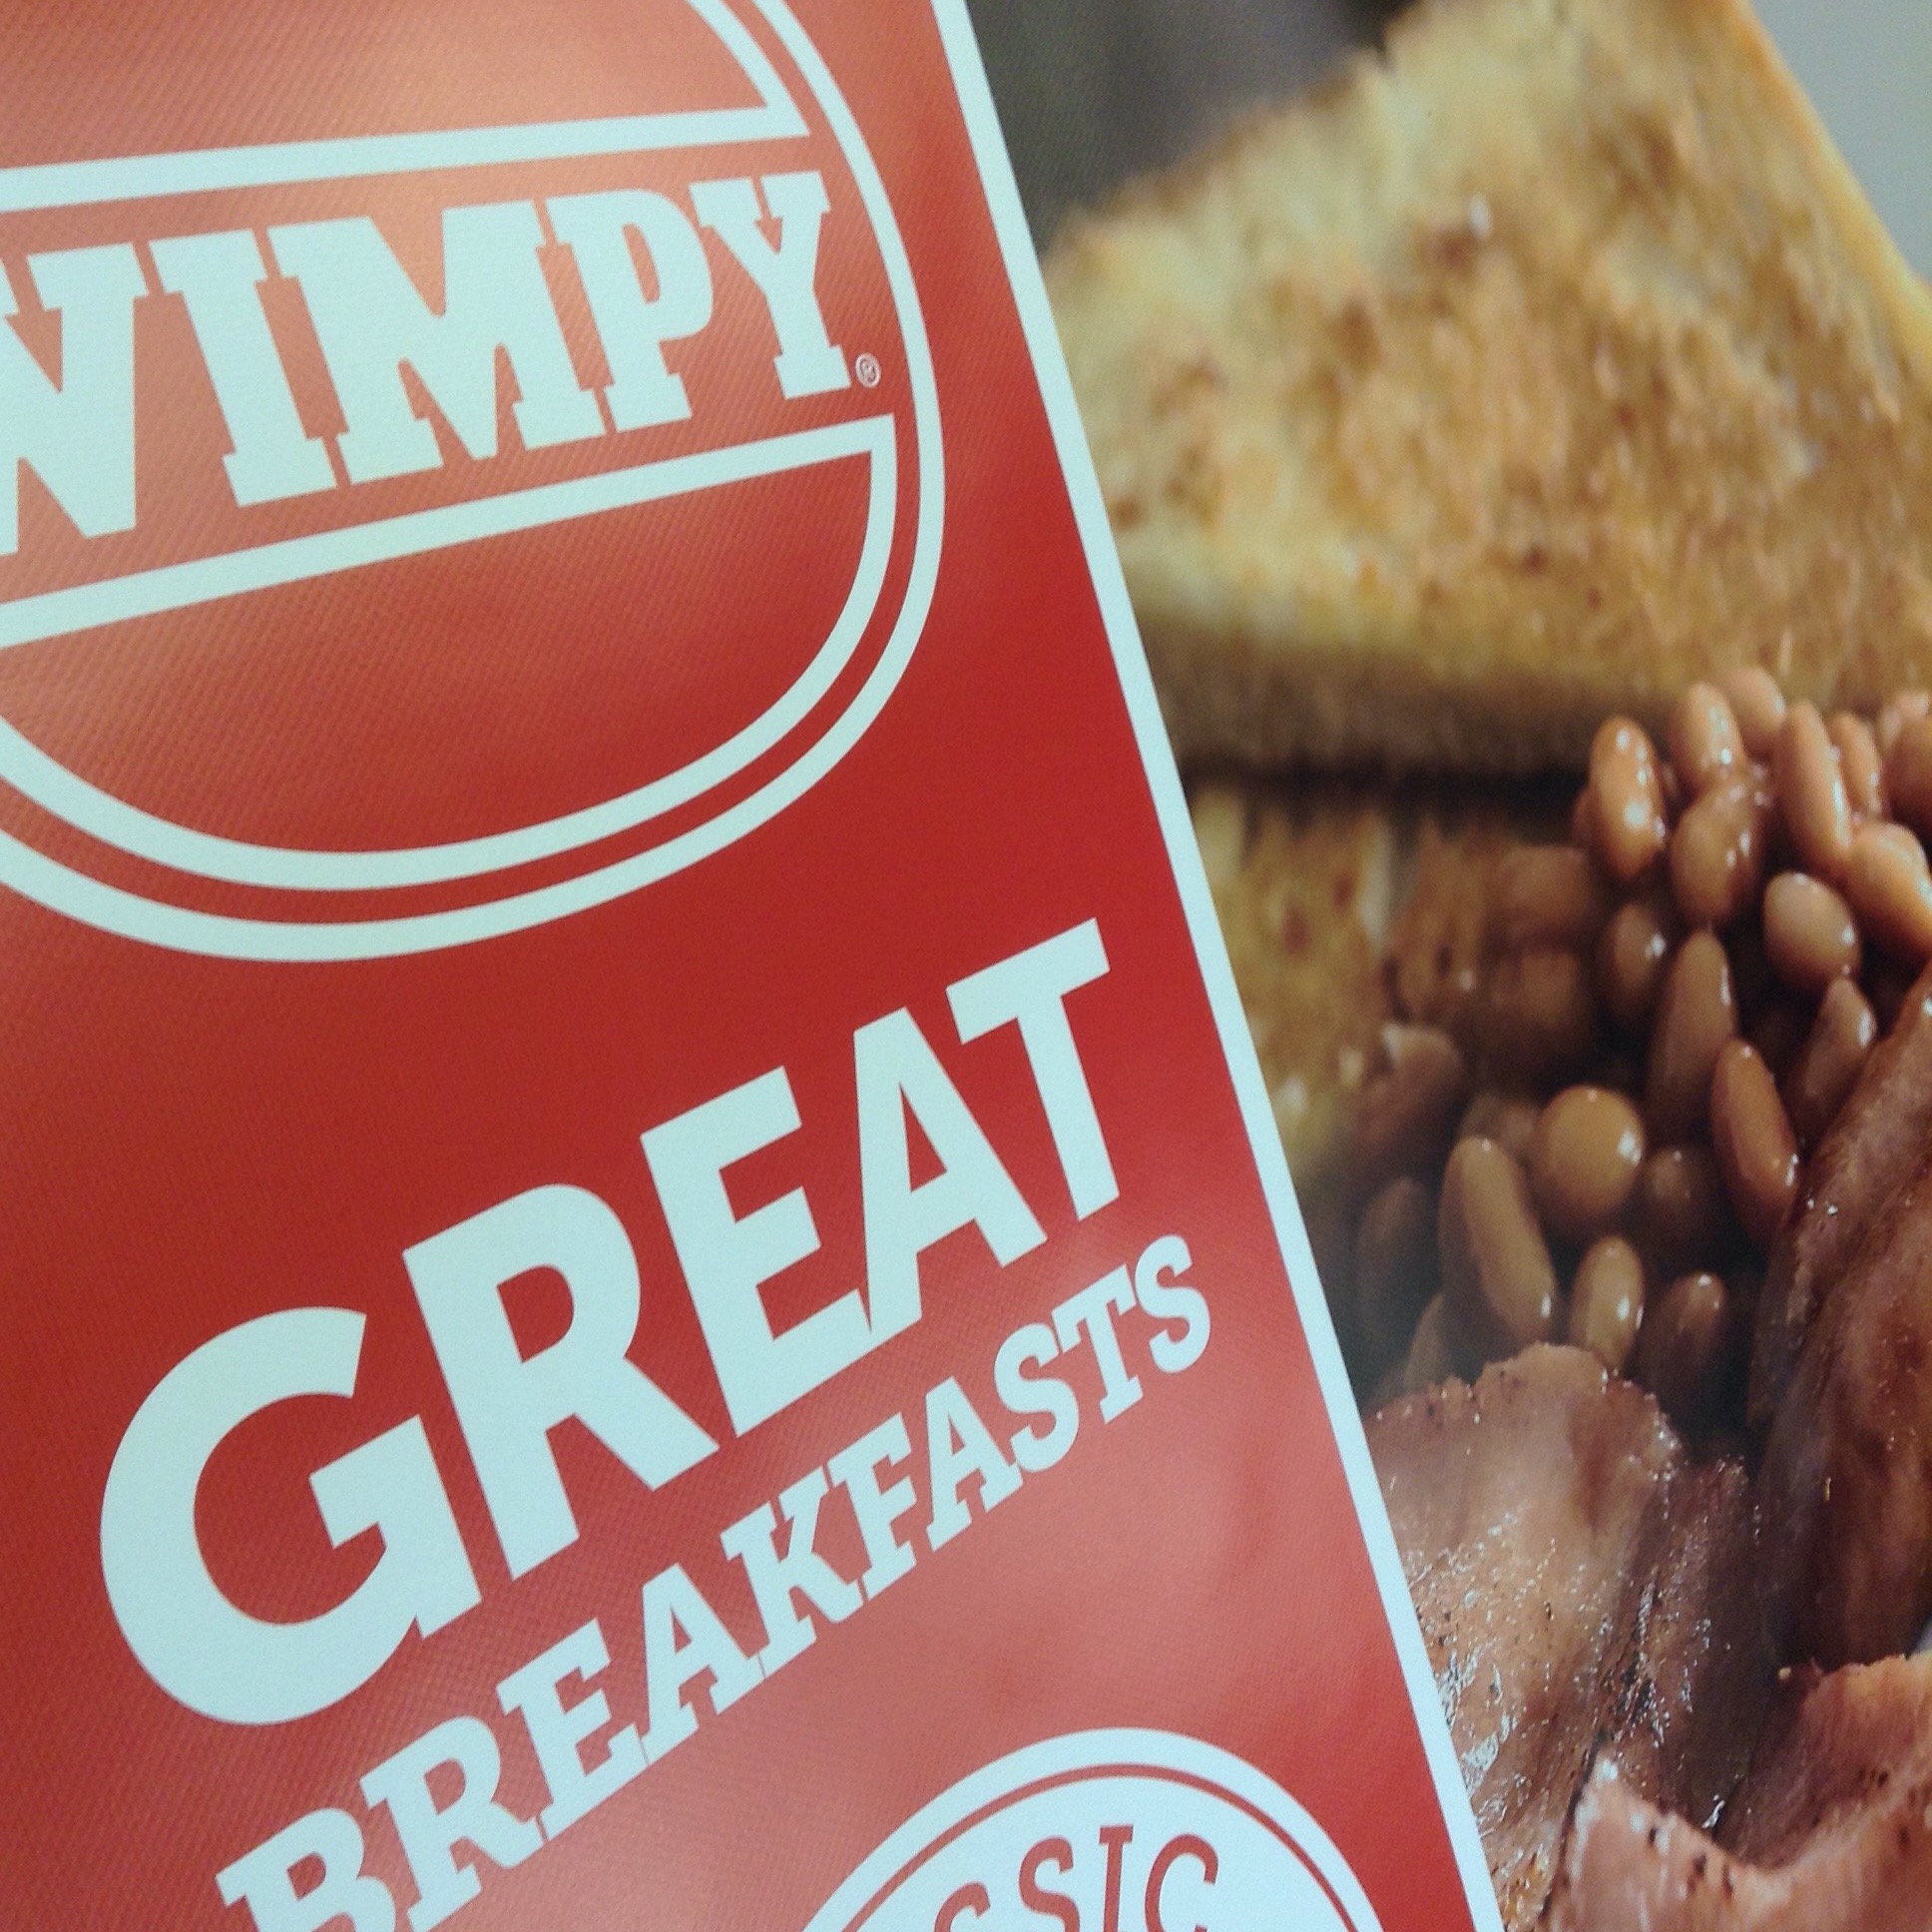 Wimpy - PVC Banners